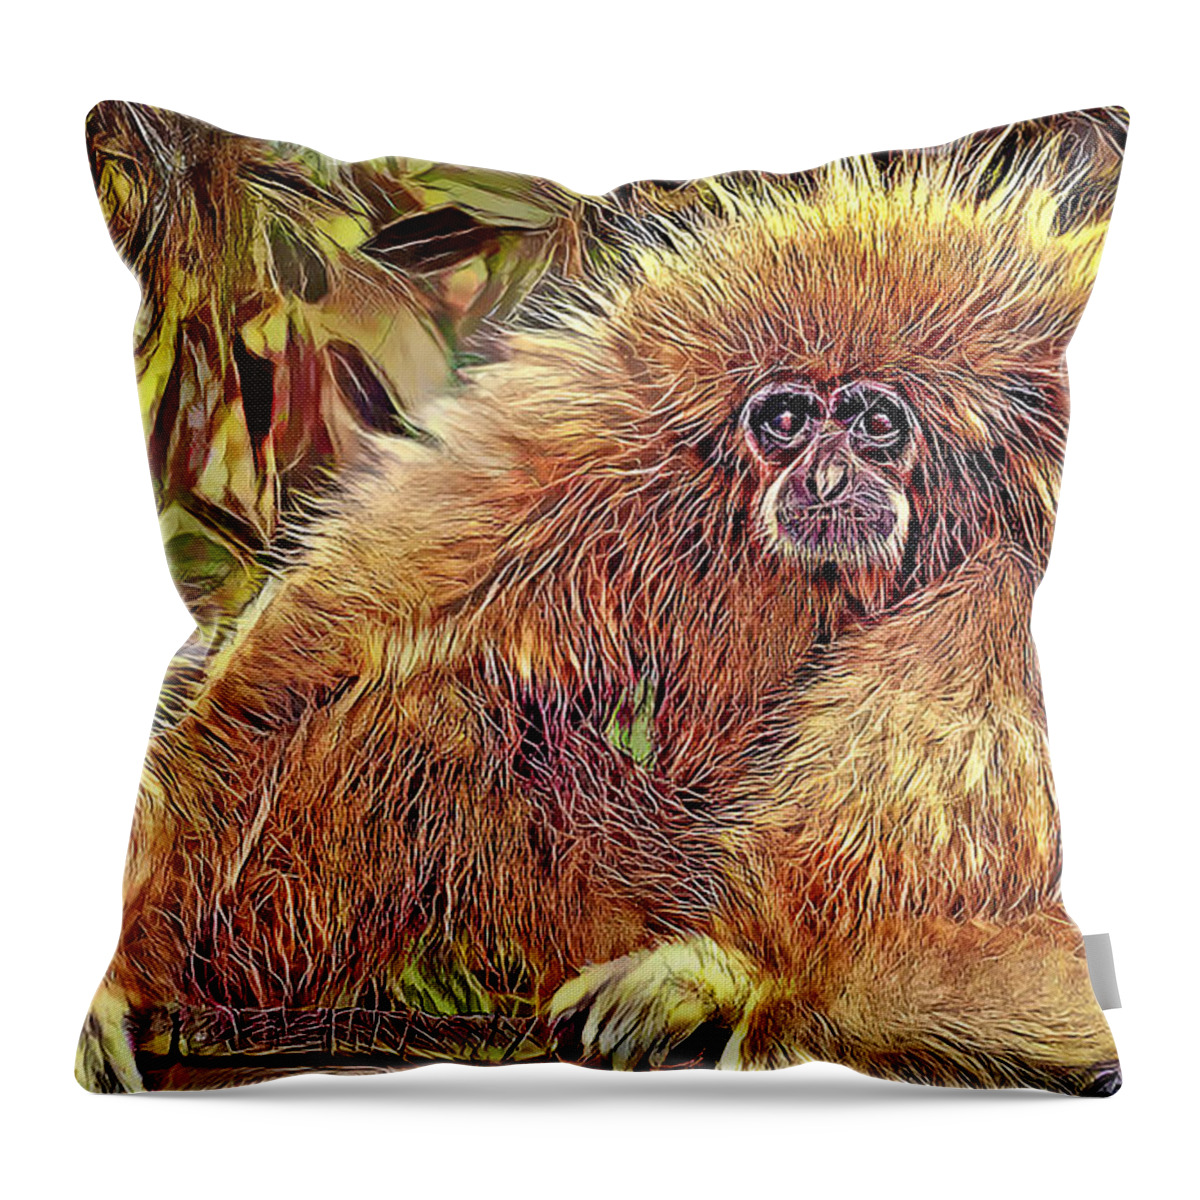 Gibbons Throw Pillow featuring the mixed media Bad Hair Day by Debra Kewley